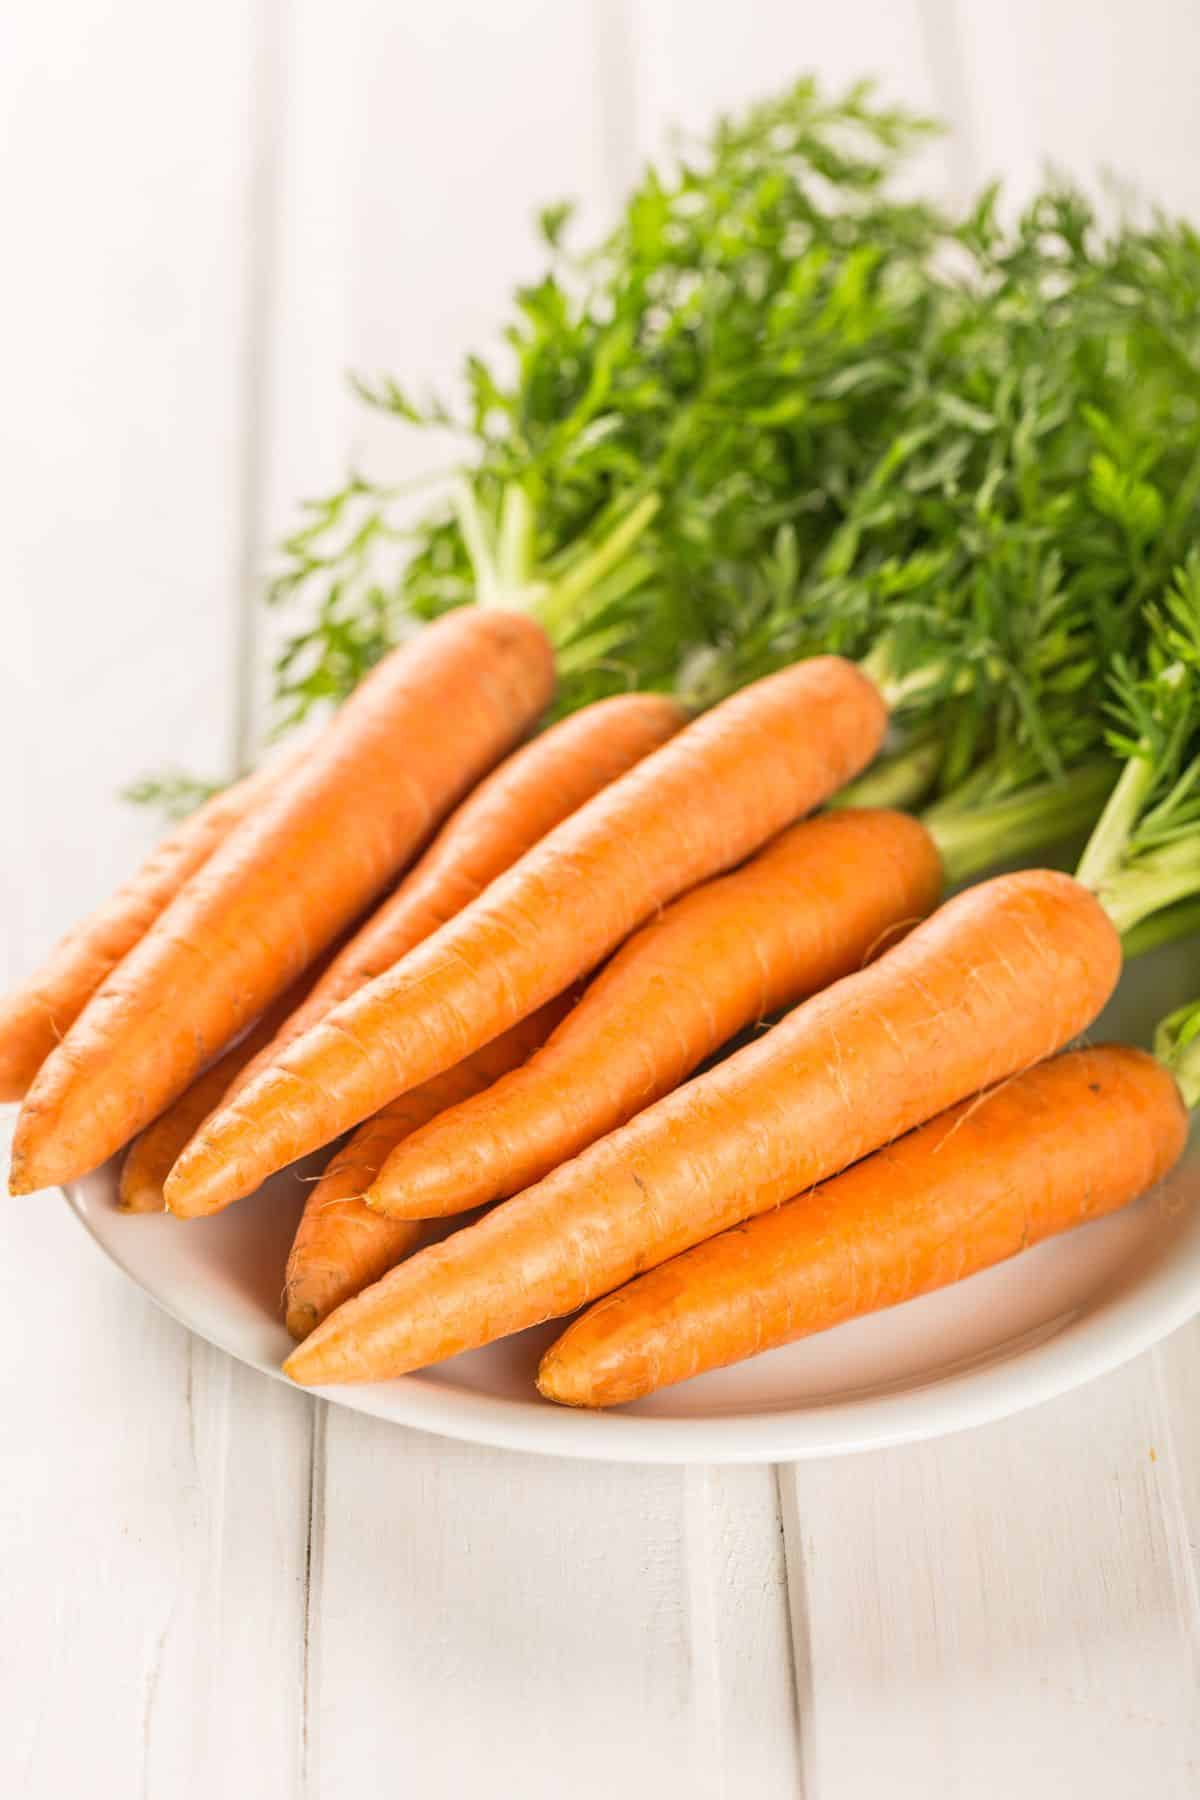 a plate of carrots